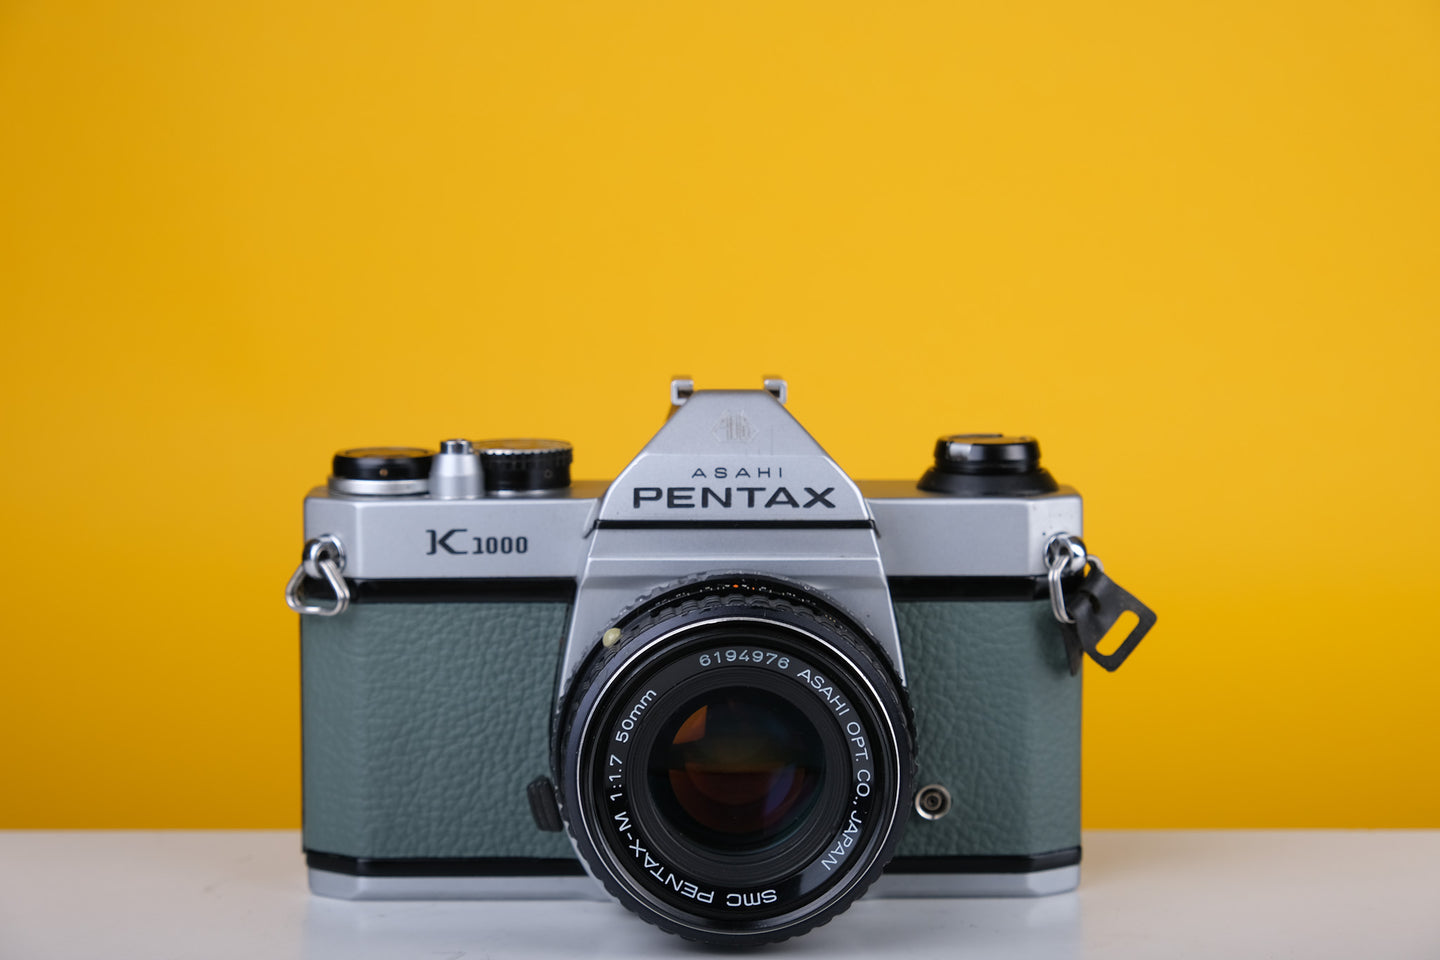 Pentax K1000 35mm Film Camera with SMC Pentax M 50mm f/1.7 Prime Lens and New Grey Leather Skin